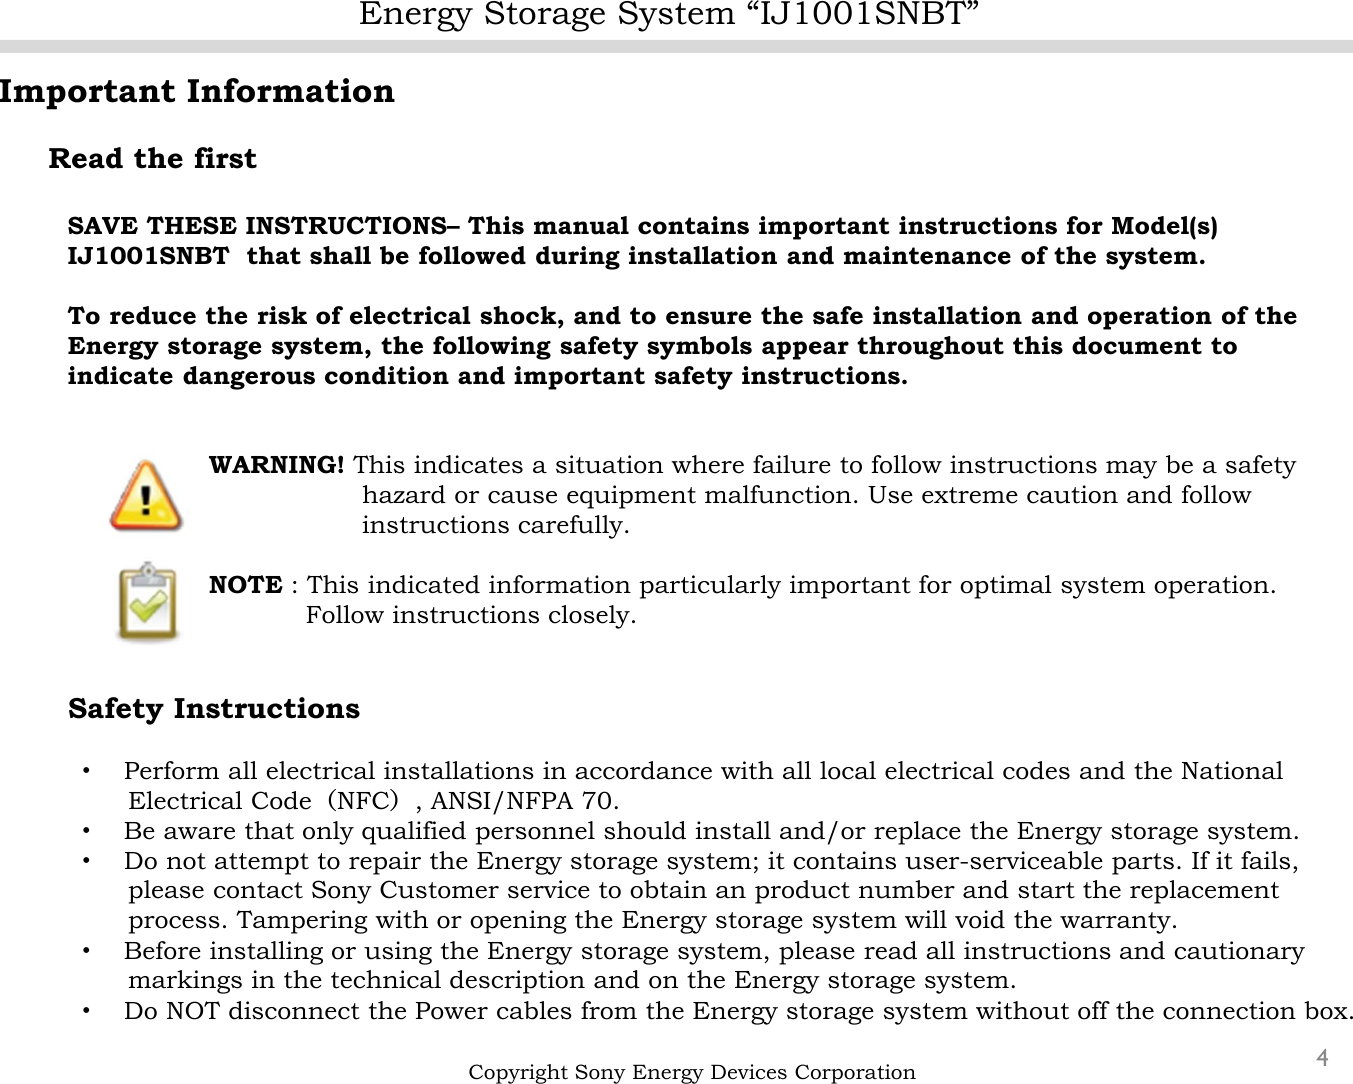 Energy Storage System “IJ1001SNBT”4Important InformationRead the firstSAVE THESE INSTRUCTIONS– This manual contains important instructions for Model(s)      IJ1001SNBT that shall be followed during installation and maintenance of the system.To reduce the risk of electrical shock, and to ensure the safe installation and operation of the Energy storage system, the following safety symbols appear throughout this document to indicate dangerous condition and important safety instructions.WARNING! This indicates a situation where failure to follow instructions may be a safetyhazard or cause equipment malfunction. Use extreme caution and followinstructions carefully.NOTE : This indicated information particularly important for optimal system operation.Follow instructions closely.Safety Instructions・Perform all electrical installations in accordance with all local electrical codes and the National Electrical Code（NFC）, ANSI/NFPA 70.・Be aware that only qualified personnel should install and/or replace the Energy storage system.・Do not attempt to repair the Energy storage system; it contains user-serviceable parts. If it fails,please contact Sony Customer service to obtain an product number and start the replacement process. Tampering with or opening the Energy storage system will void the warranty.・Before installing or using the Energy storage system, please read all instructions and cautionary markings in the technical description and on the Energy storage system.・Do NOT disconnect the Power cables from the Energy storage system without off the connection box.Copyright Sony Energy Devices Corporation